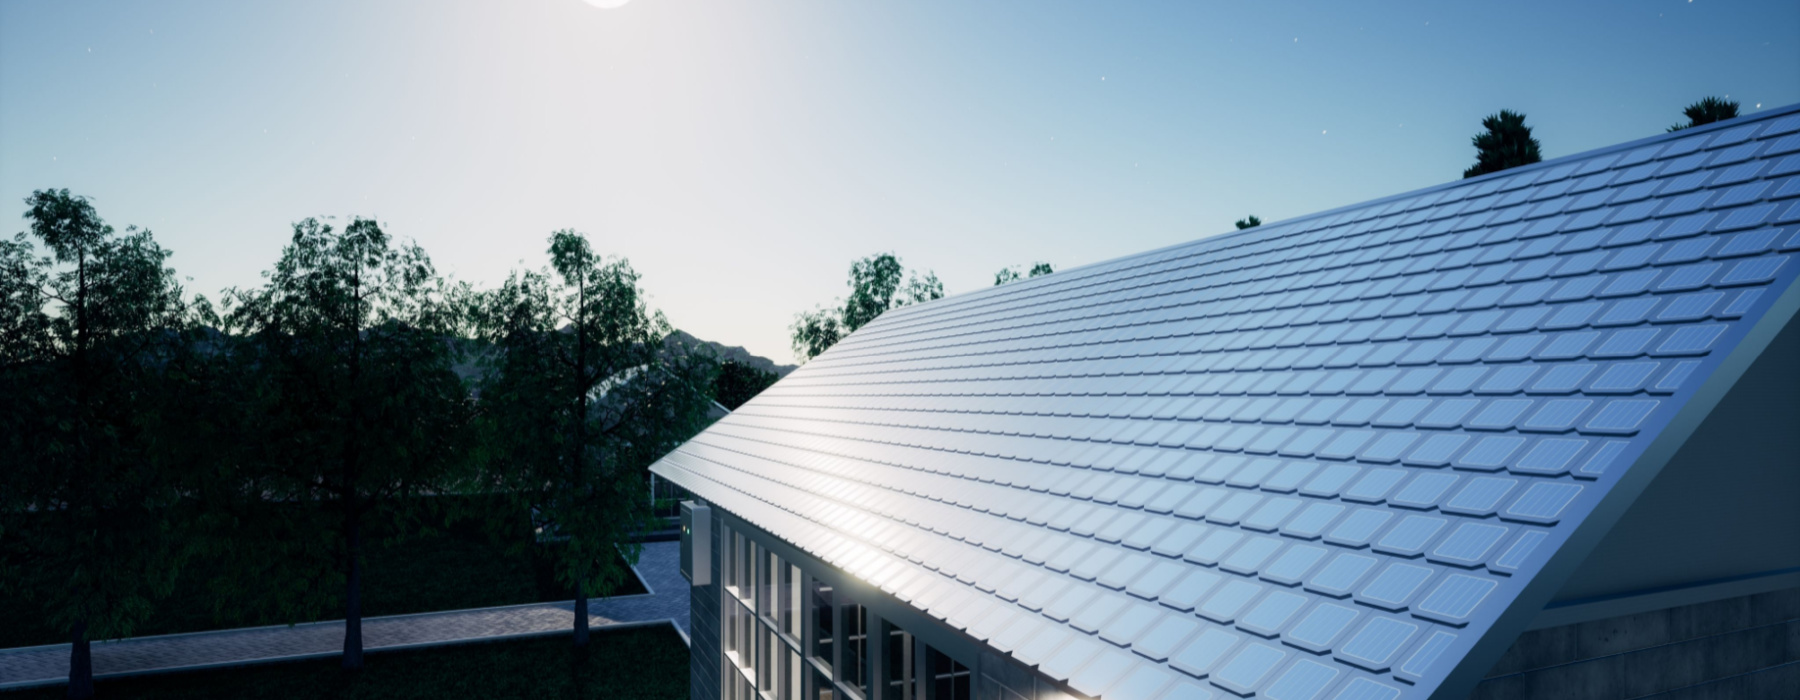 How Is the Tesla Solar Roof Different from a Traditional Roof?